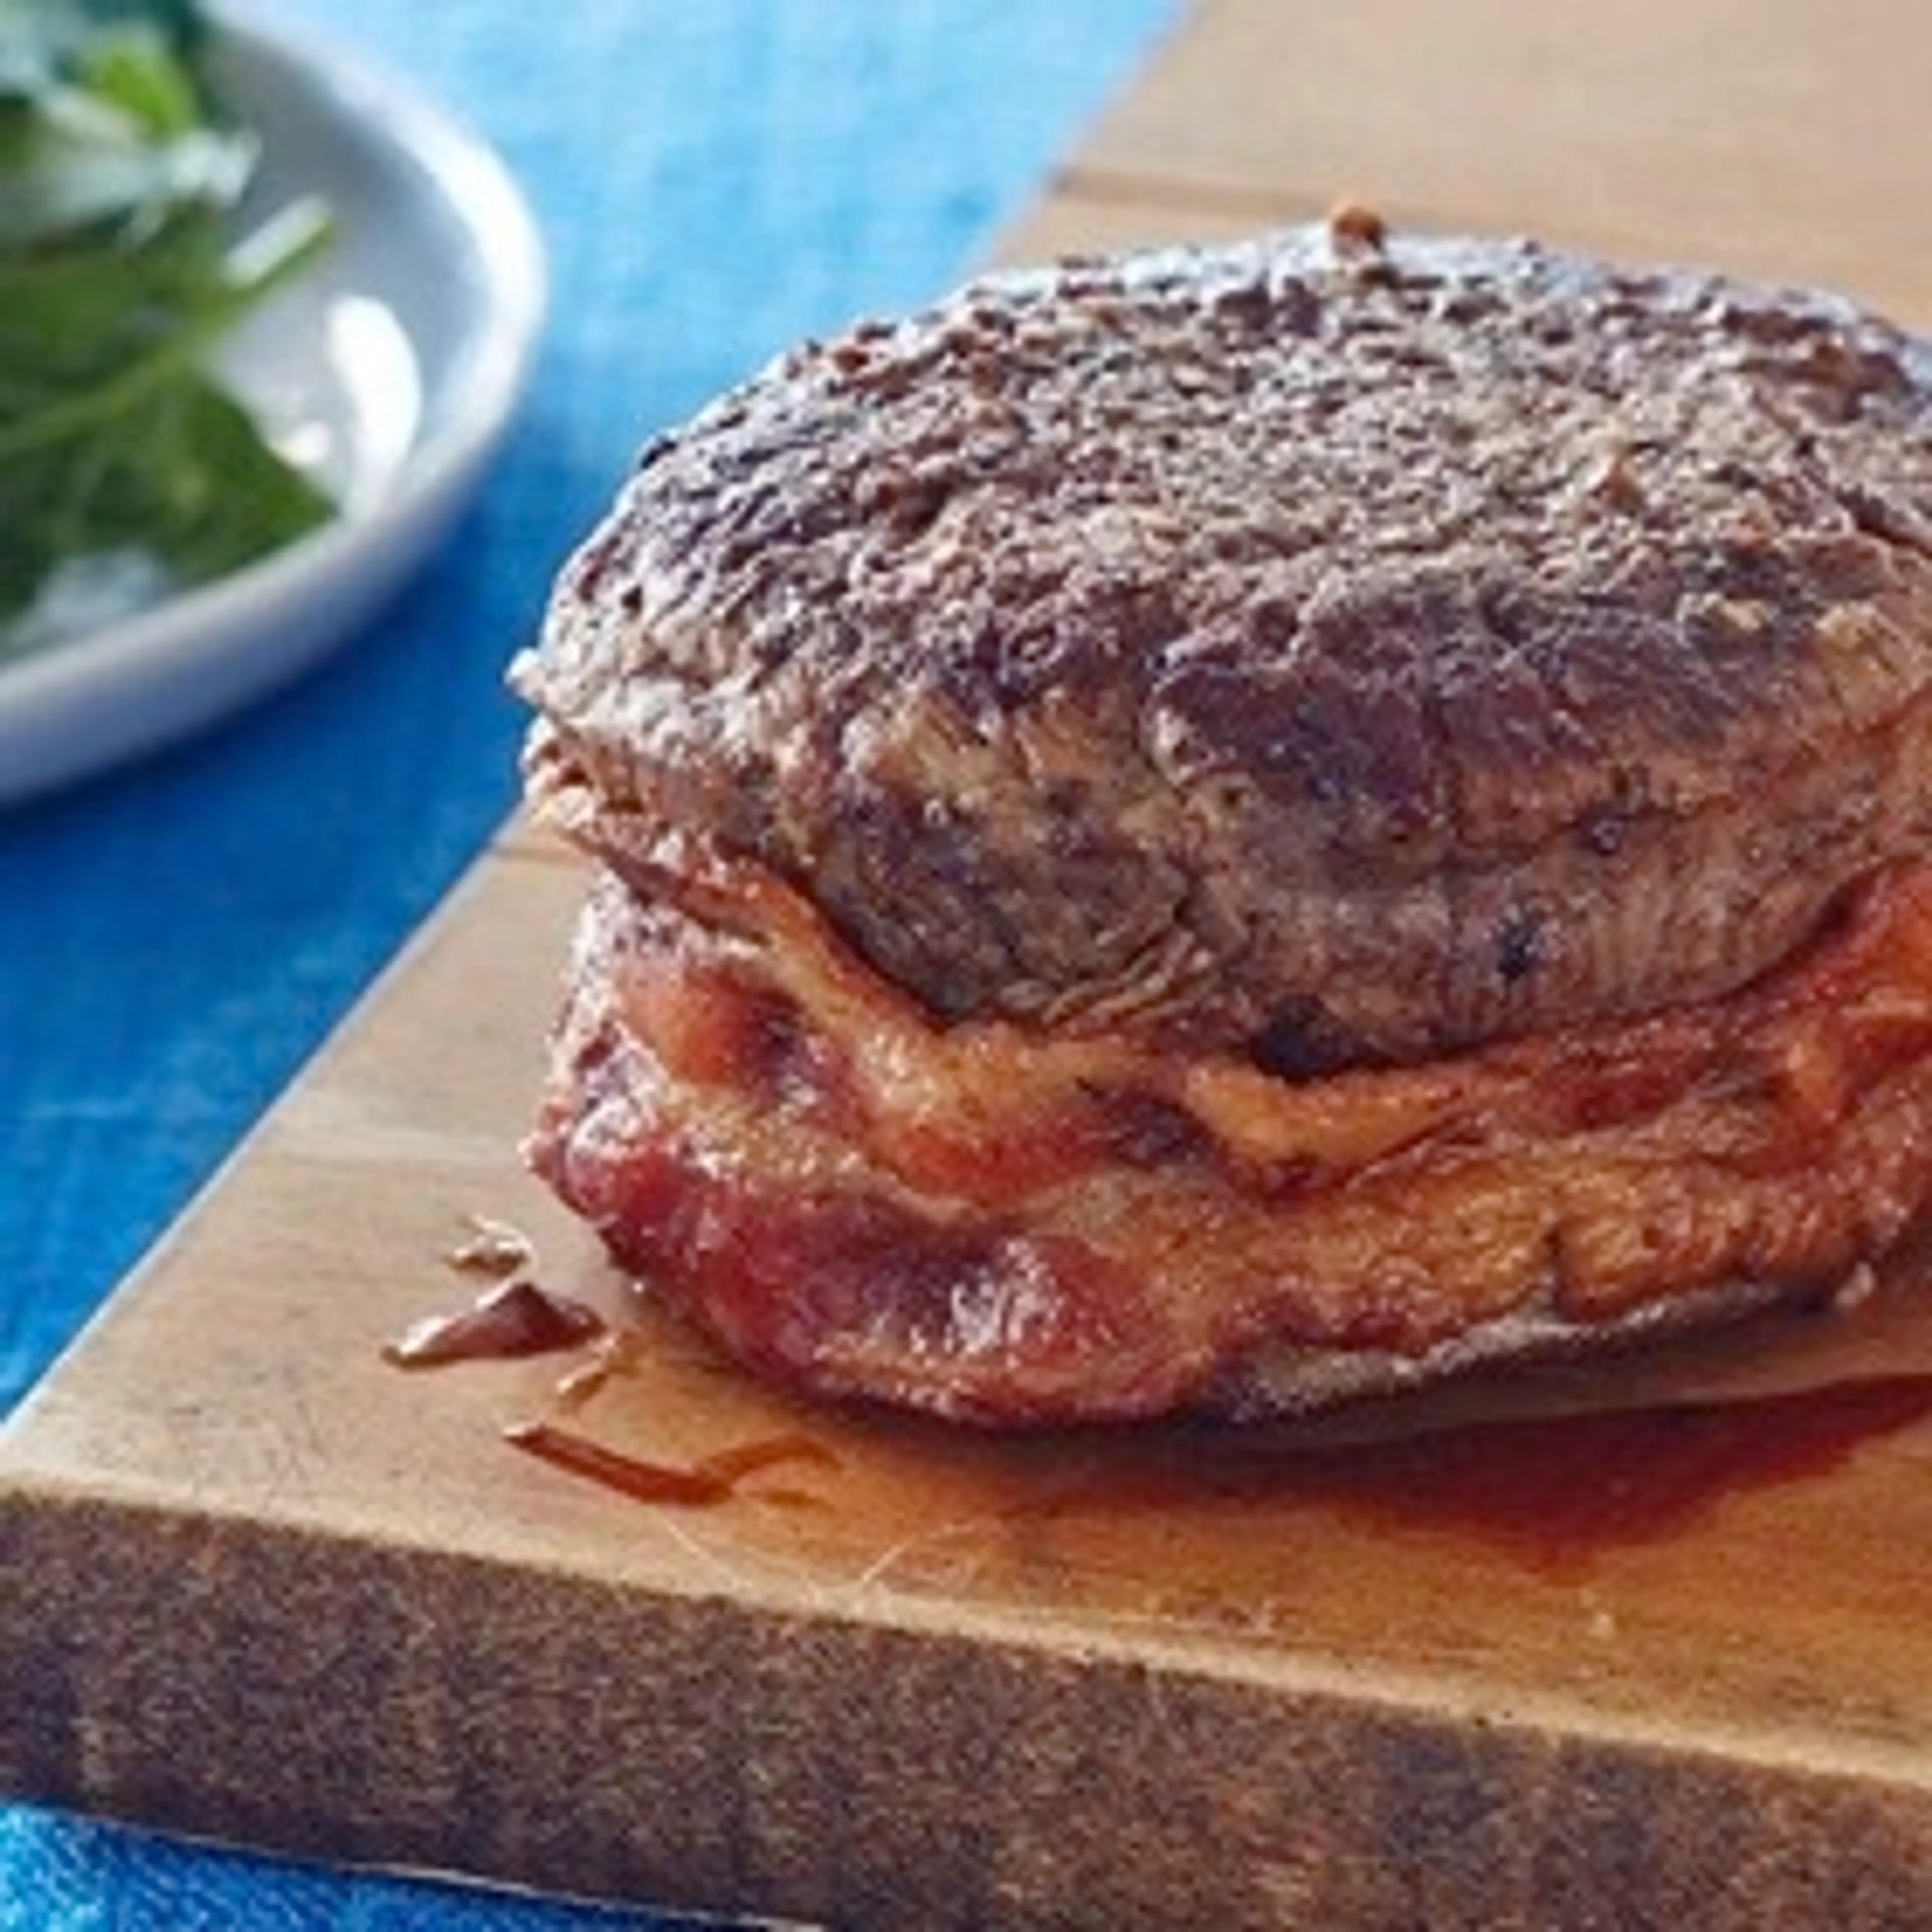 Bacon-Wrapped Filet